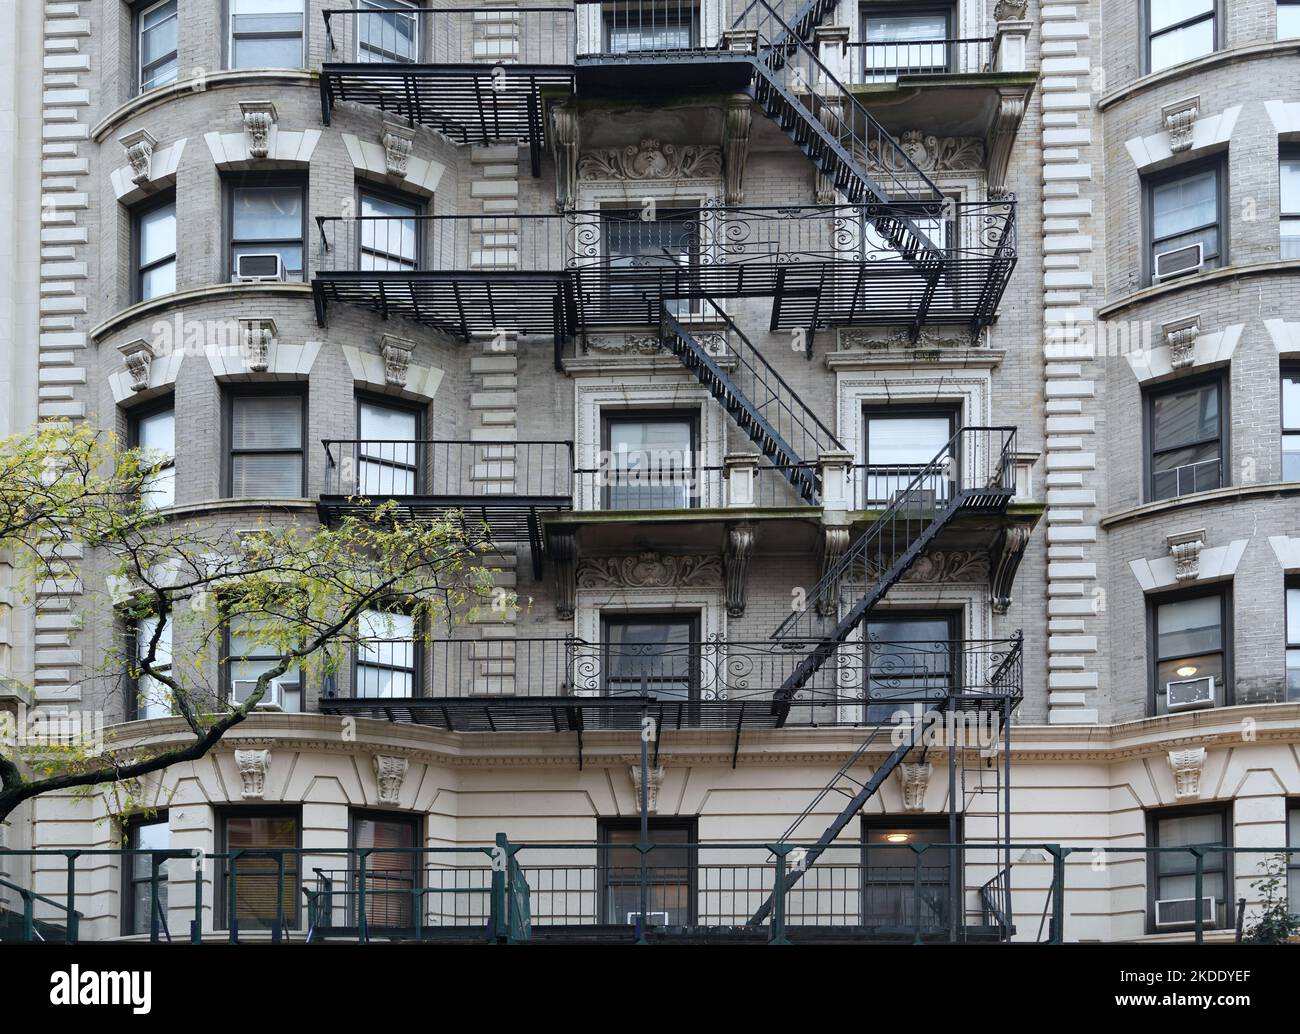 Ornate New York beaux-arts style old apartment building with external fire escape Stock Photo